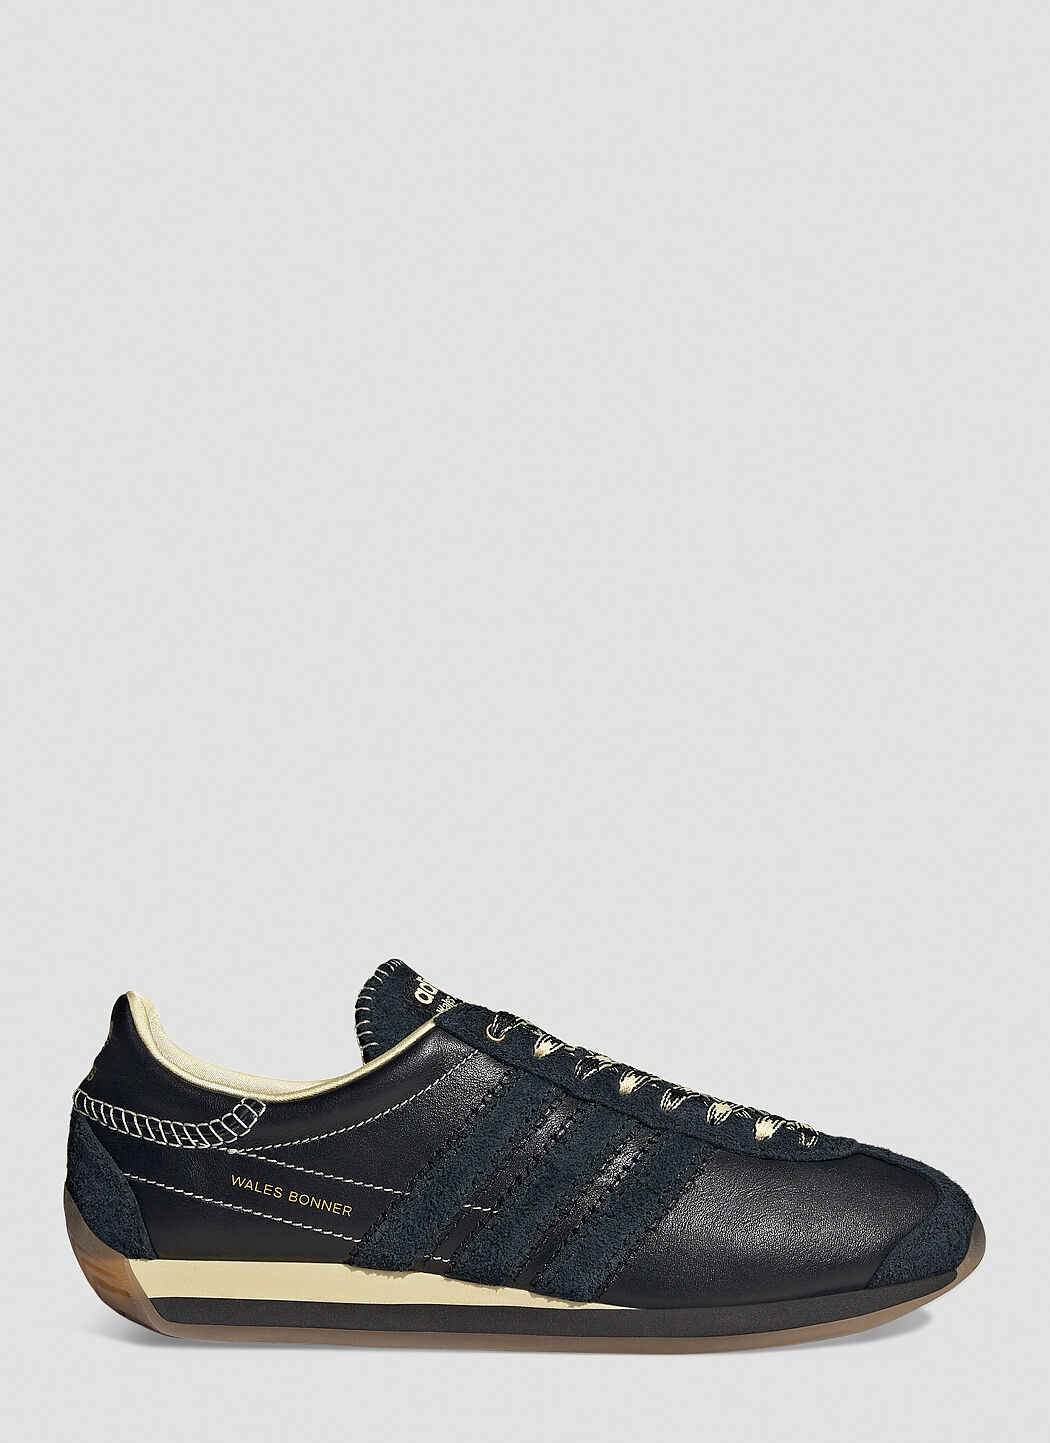 adidas by Wales Bonner Country Stripe Sneakers in Black | LN-CC®